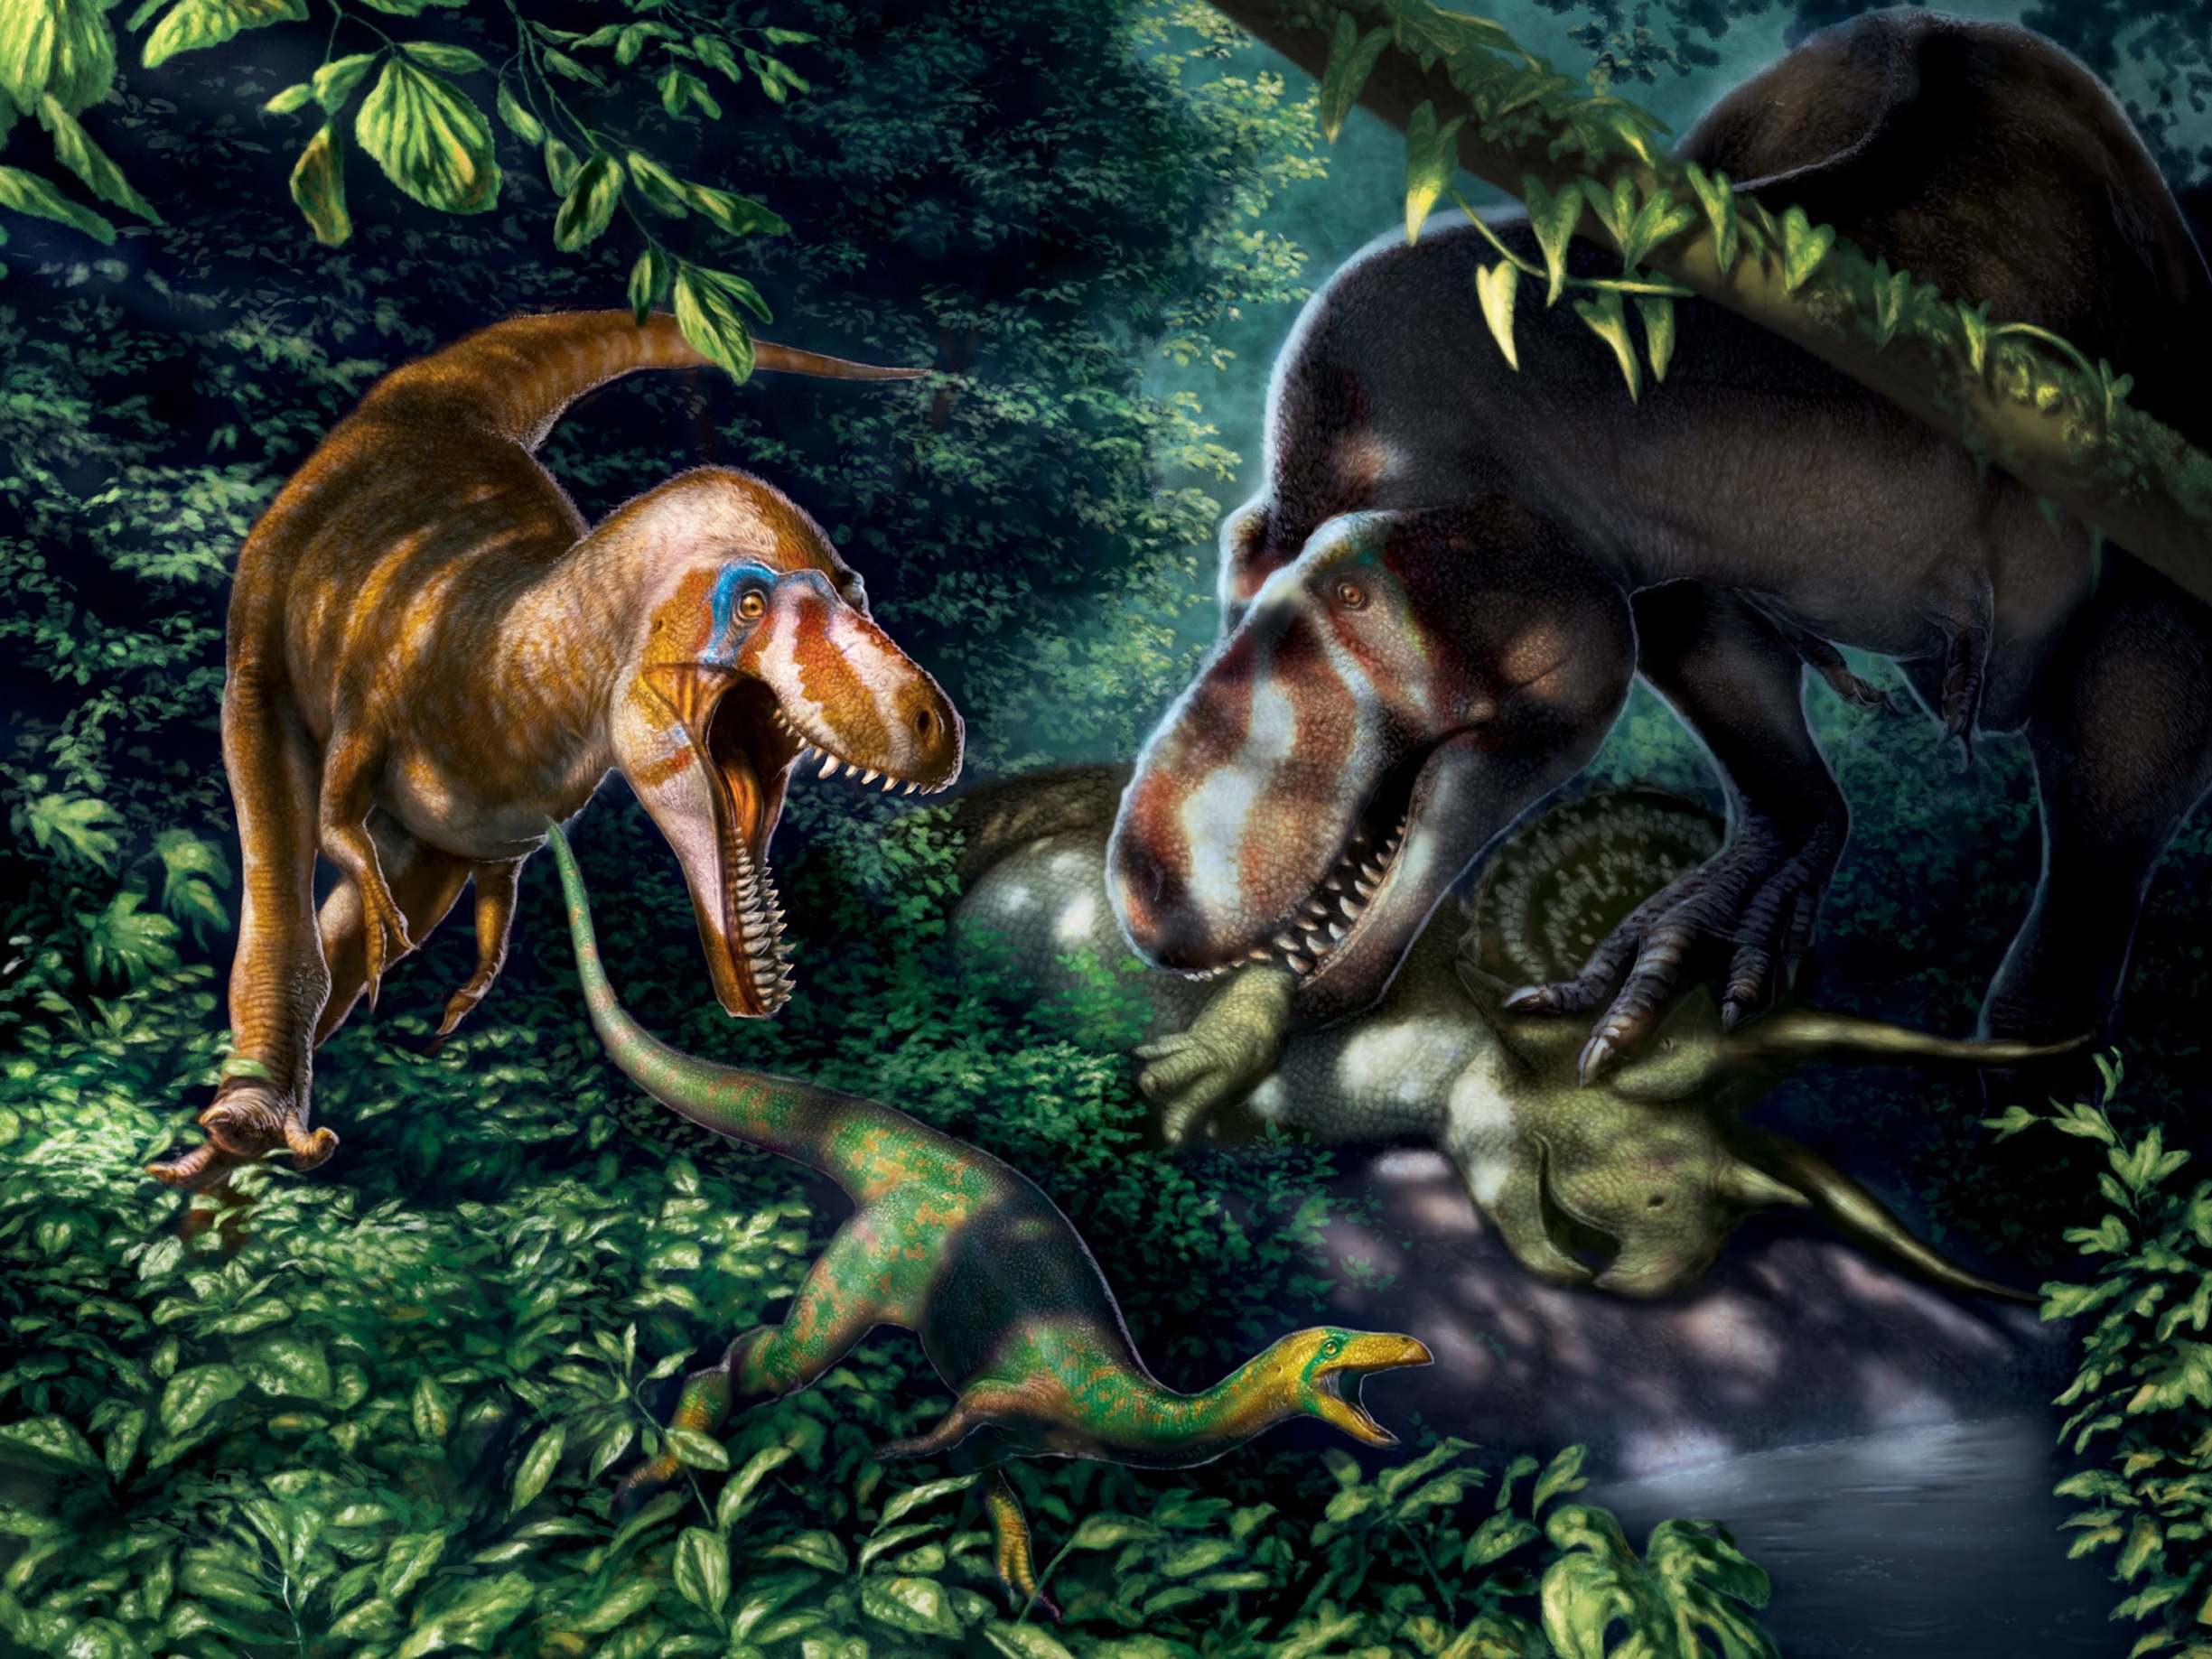 Illustration of the juvenile T rex dinosaurs, quite unlike their lumbering adult counterparts